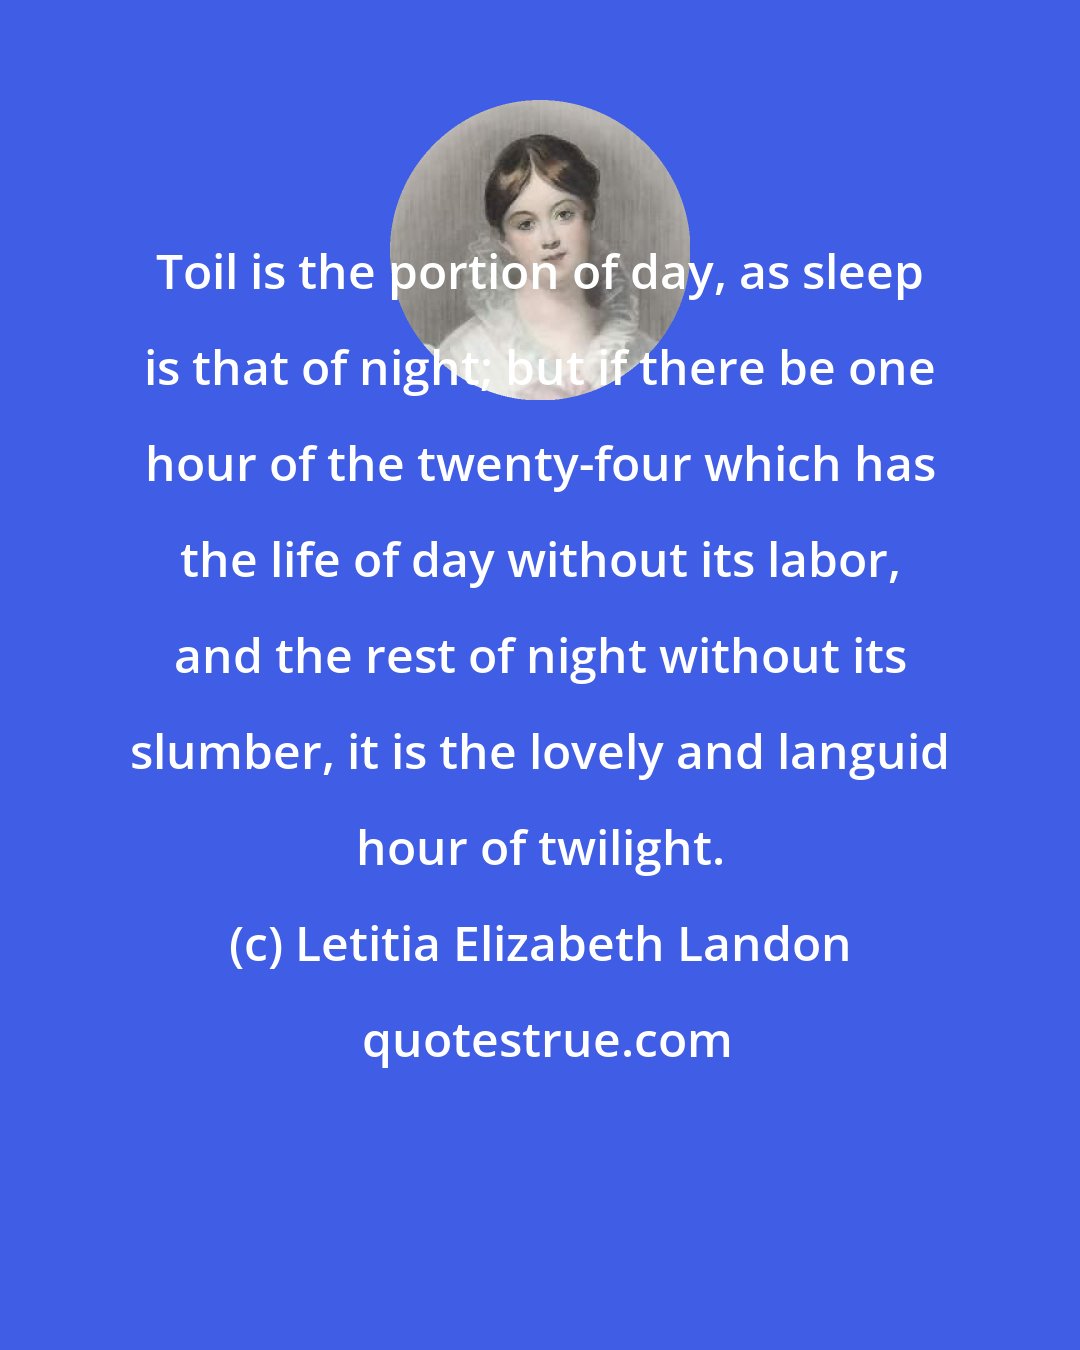 Letitia Elizabeth Landon: Toil is the portion of day, as sleep is that of night; but if there be one hour of the twenty-four which has the life of day without its labor, and the rest of night without its slumber, it is the lovely and languid hour of twilight.